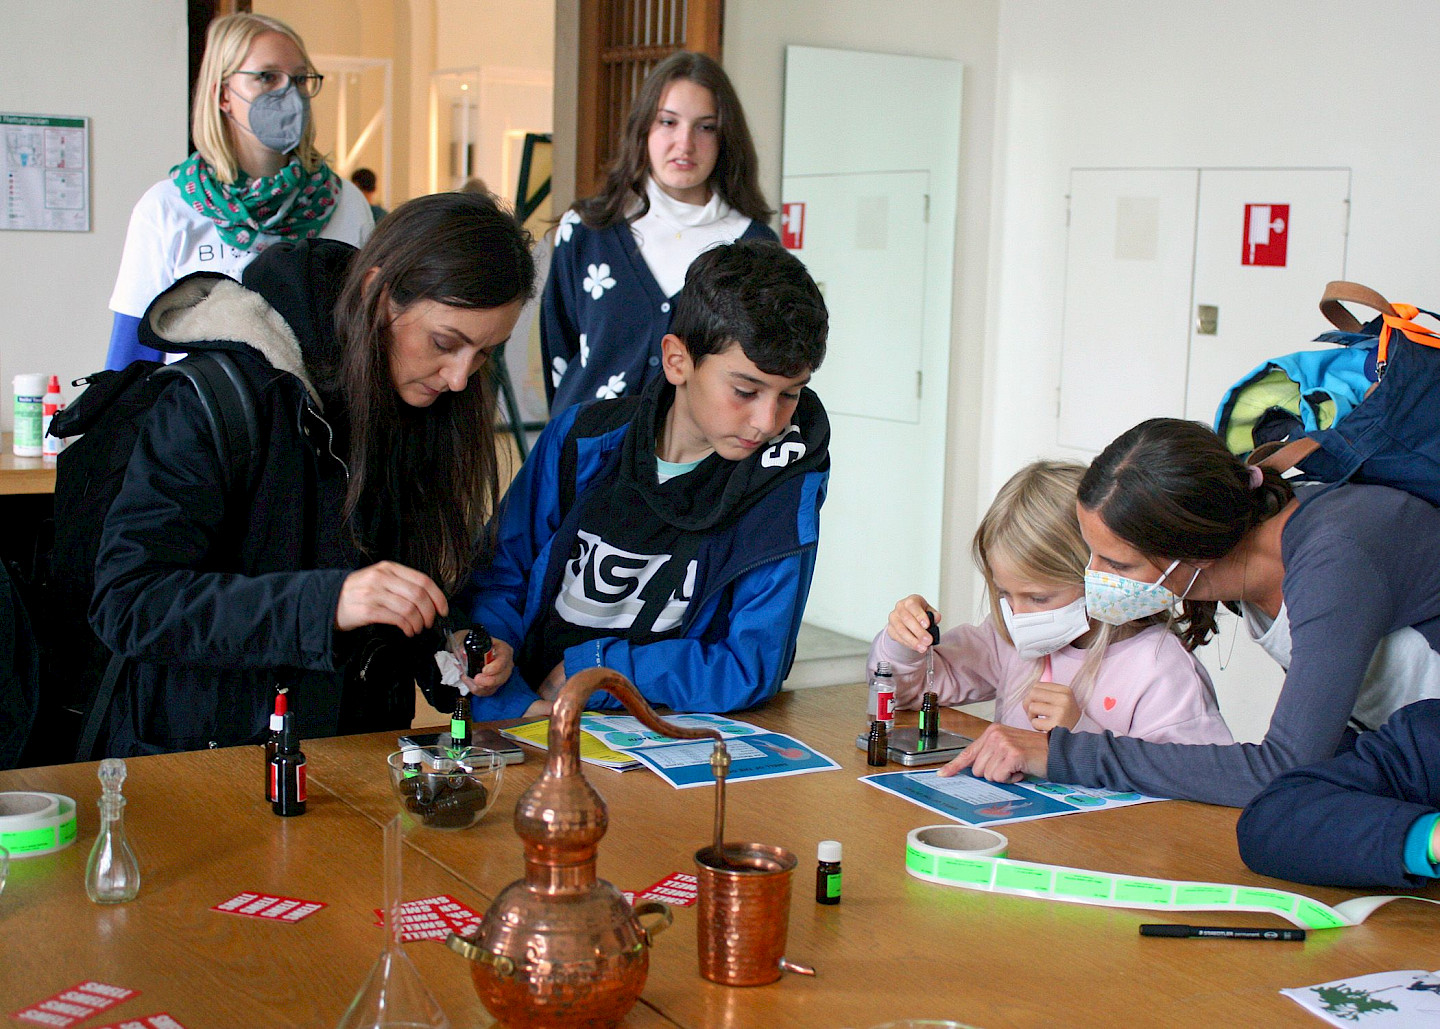 Visitors create their own fragrances in the smell lab with pipettes and instruments